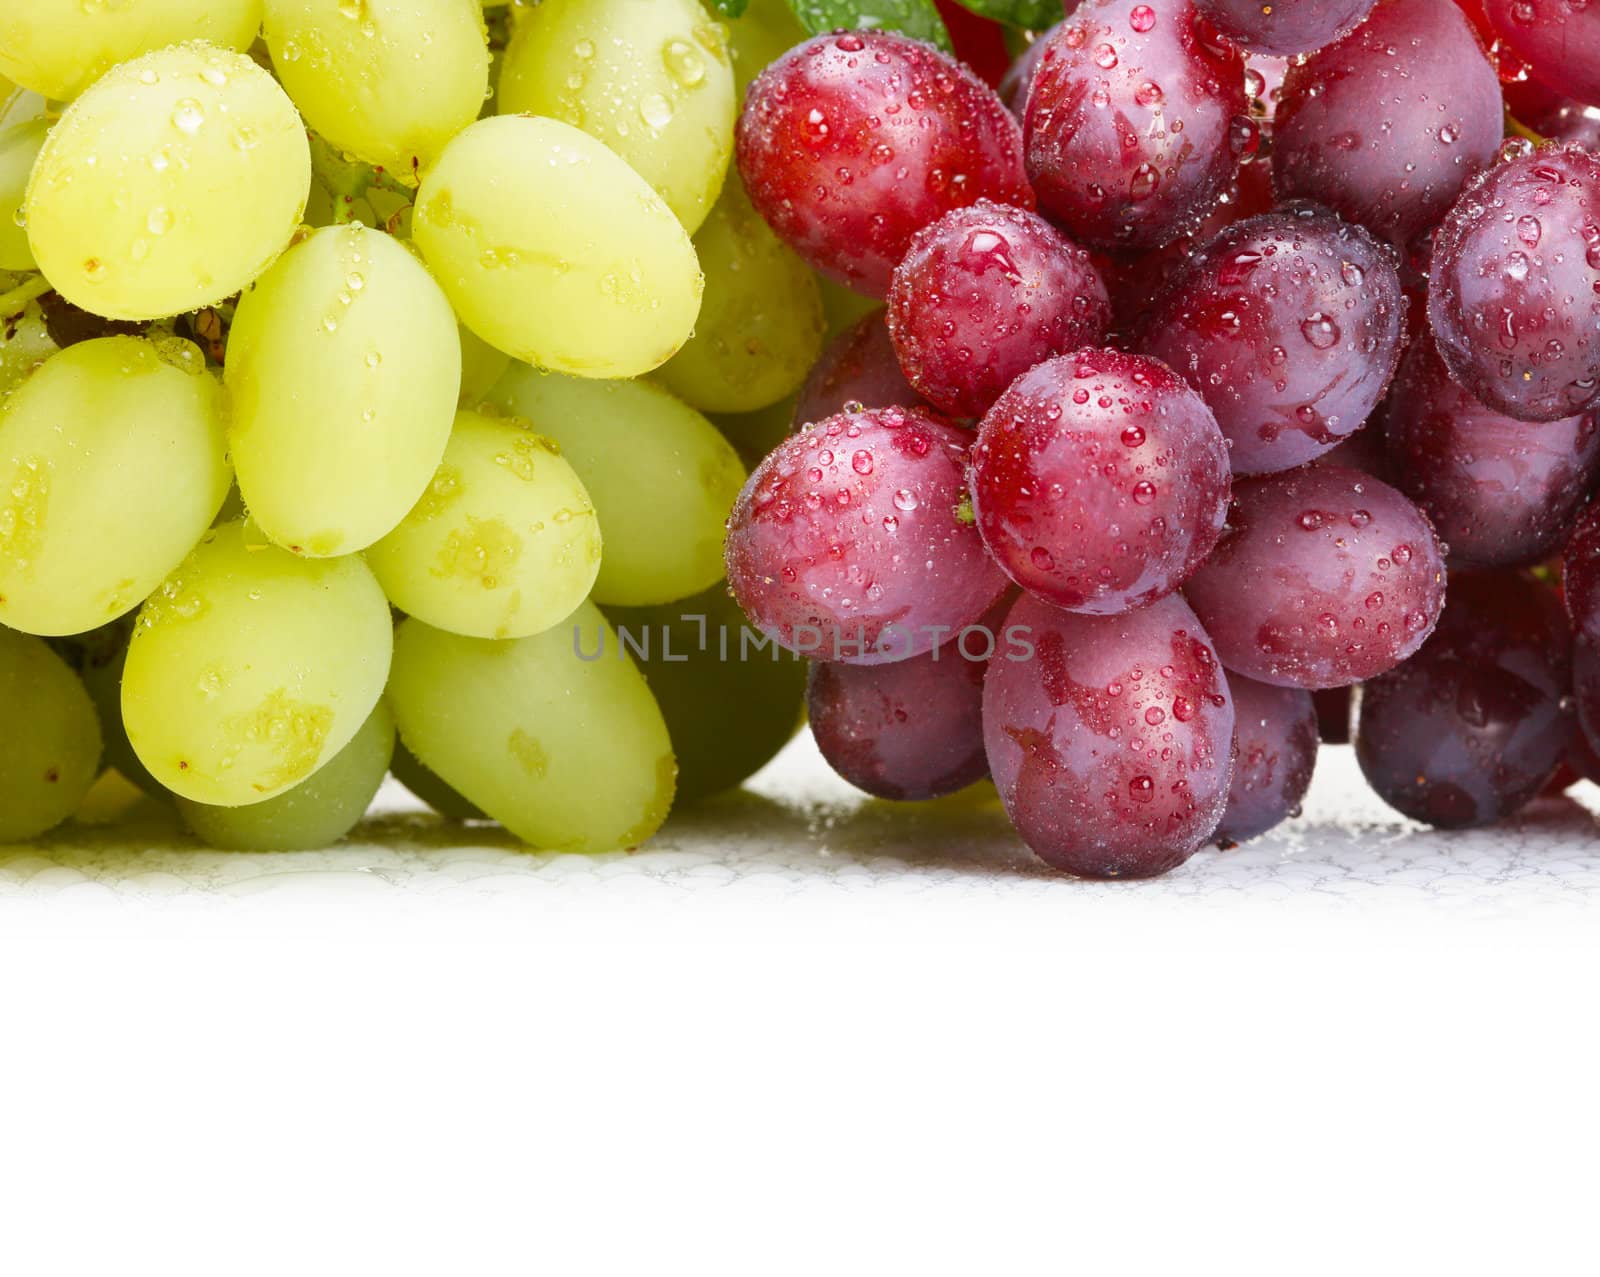 fresh green and rose grapes